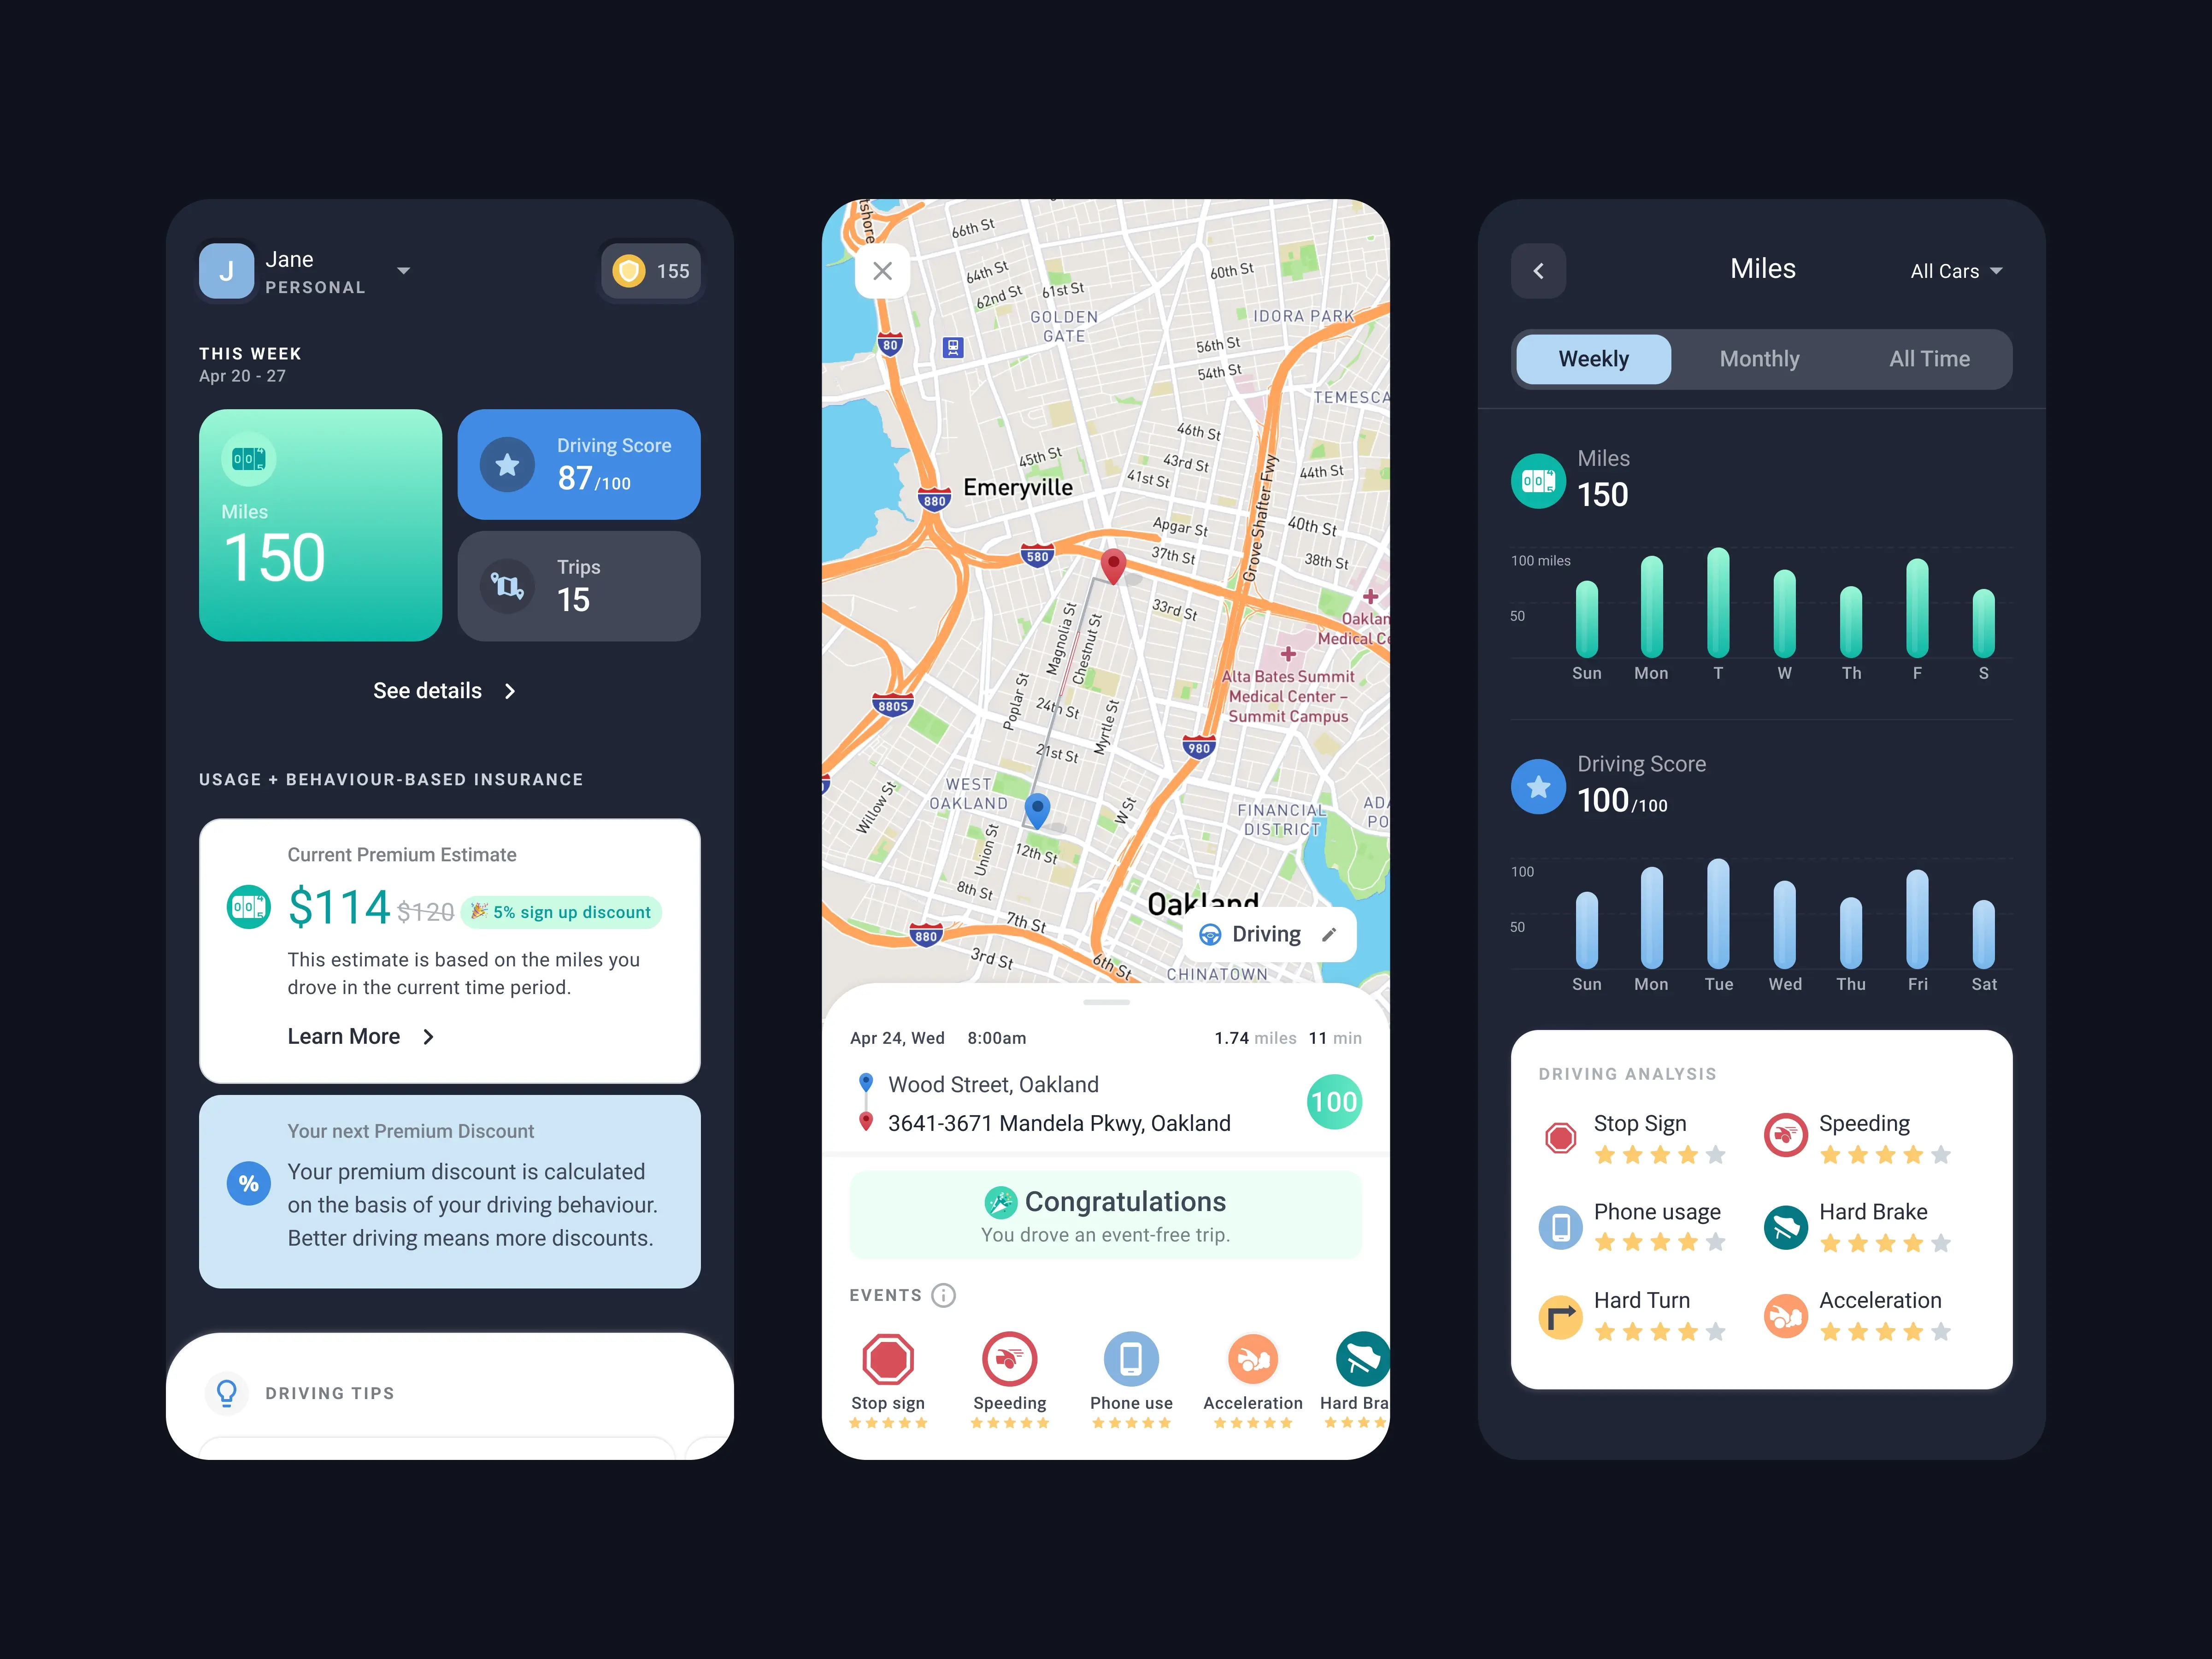 zendrive home, driving map, and weekly analysis 